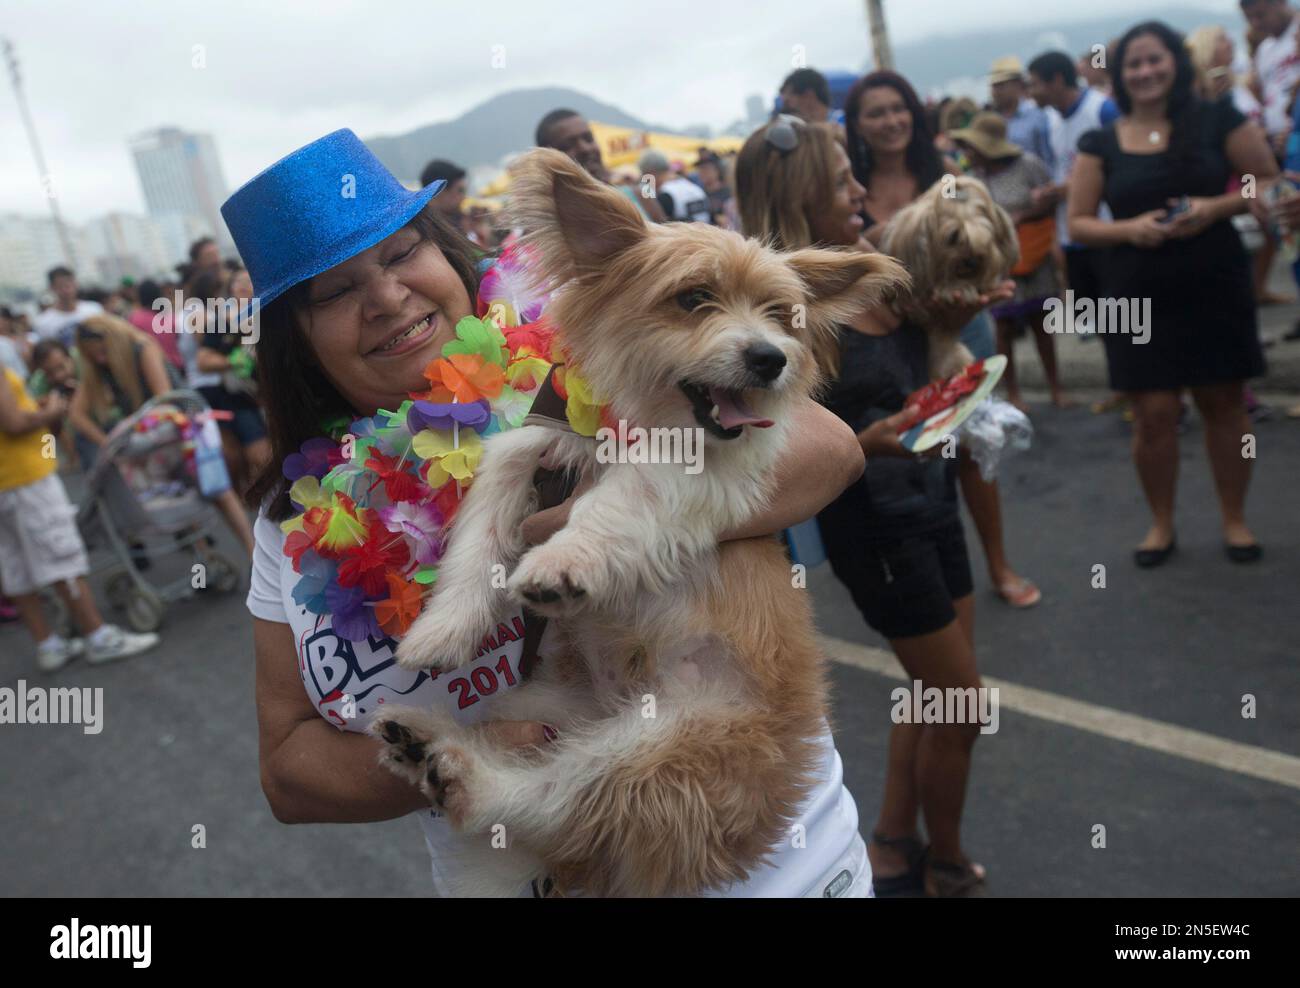 People dance with their dogs dressed for carnival, during "Blocao" dog carnival in Rio de Janeiro, Brazil, Sunday, Feb. 16, 2014. About 100 dogs have had their day at a pre-Carnival